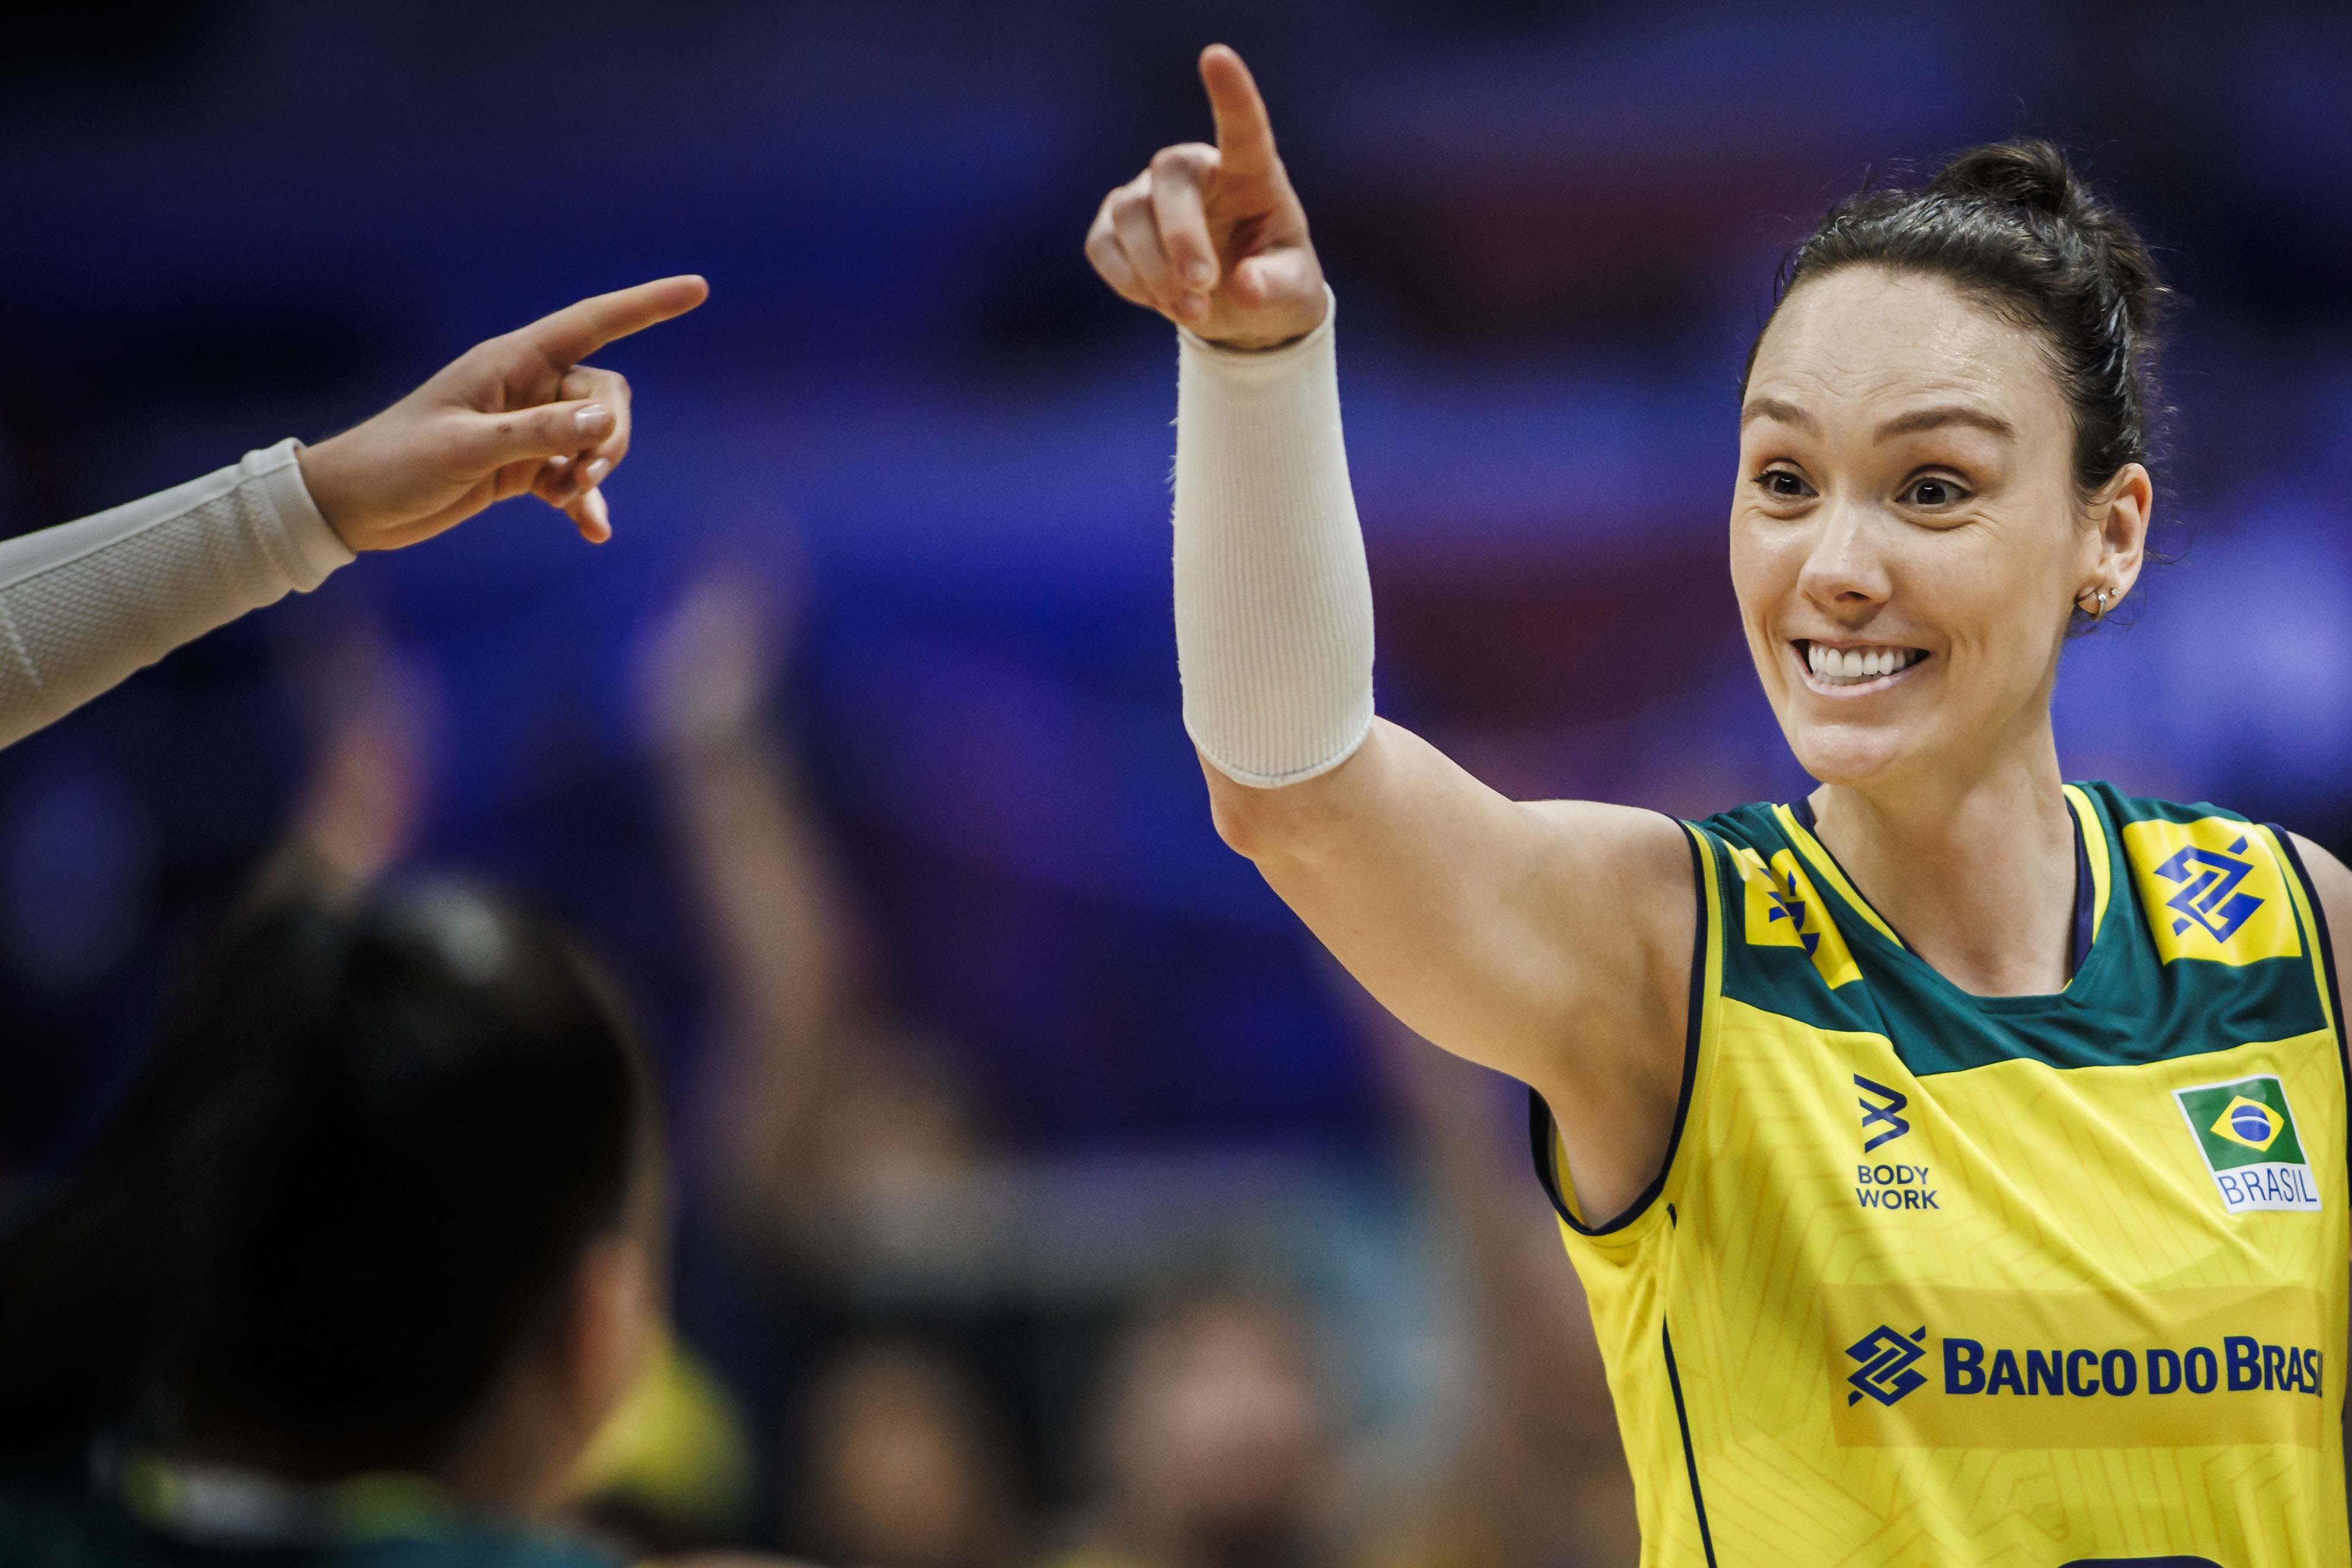 Brazil to play at Roberta’s pace in Tokyo | volleyballworld.com